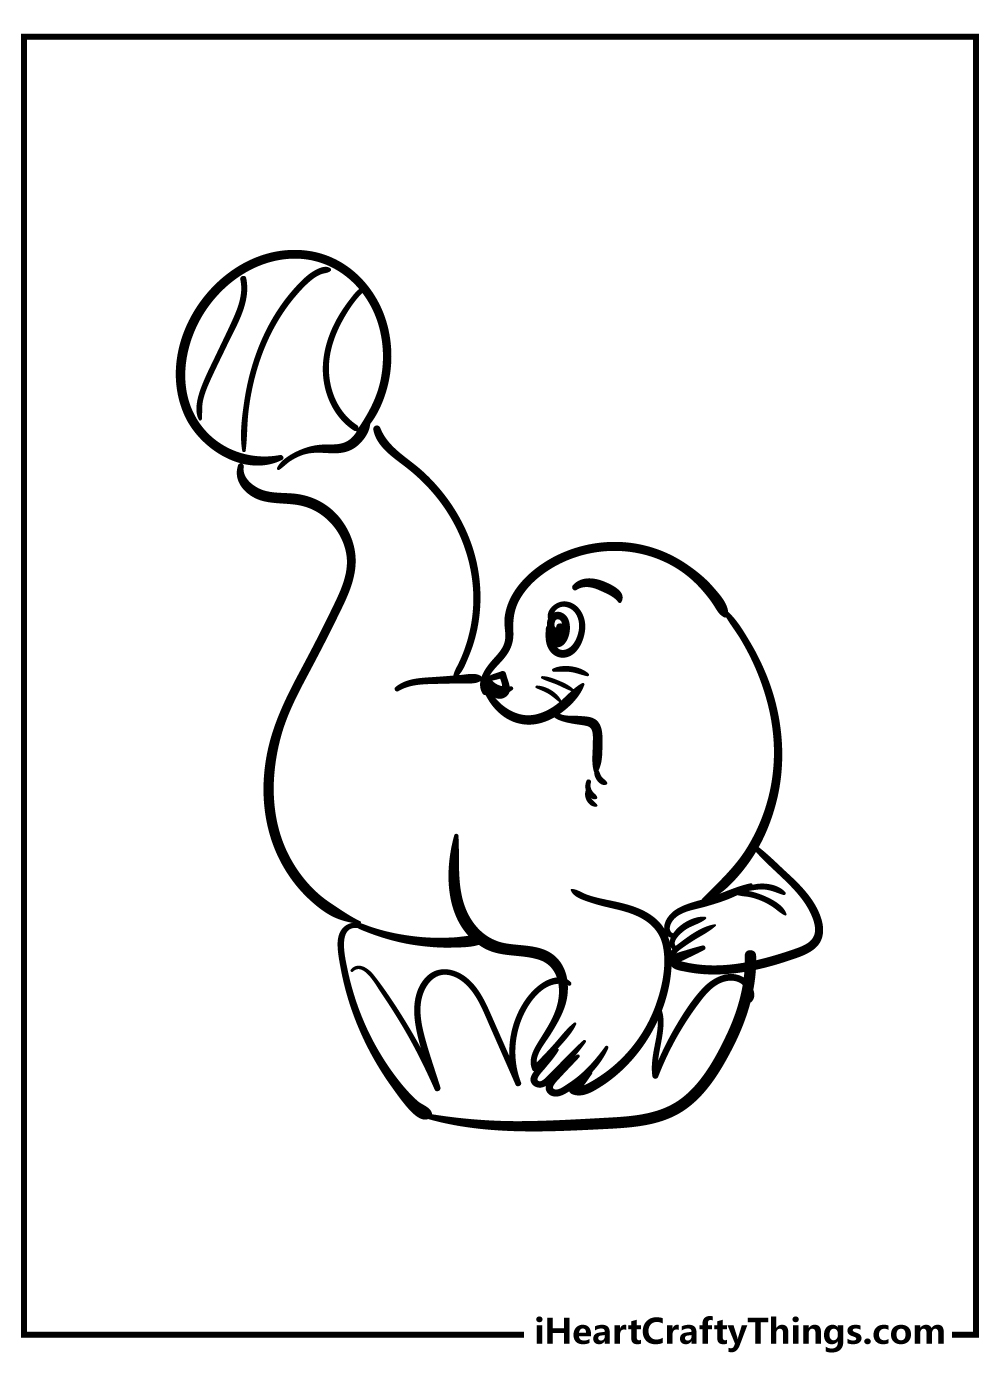 Circus Coloring Pages free pdf download